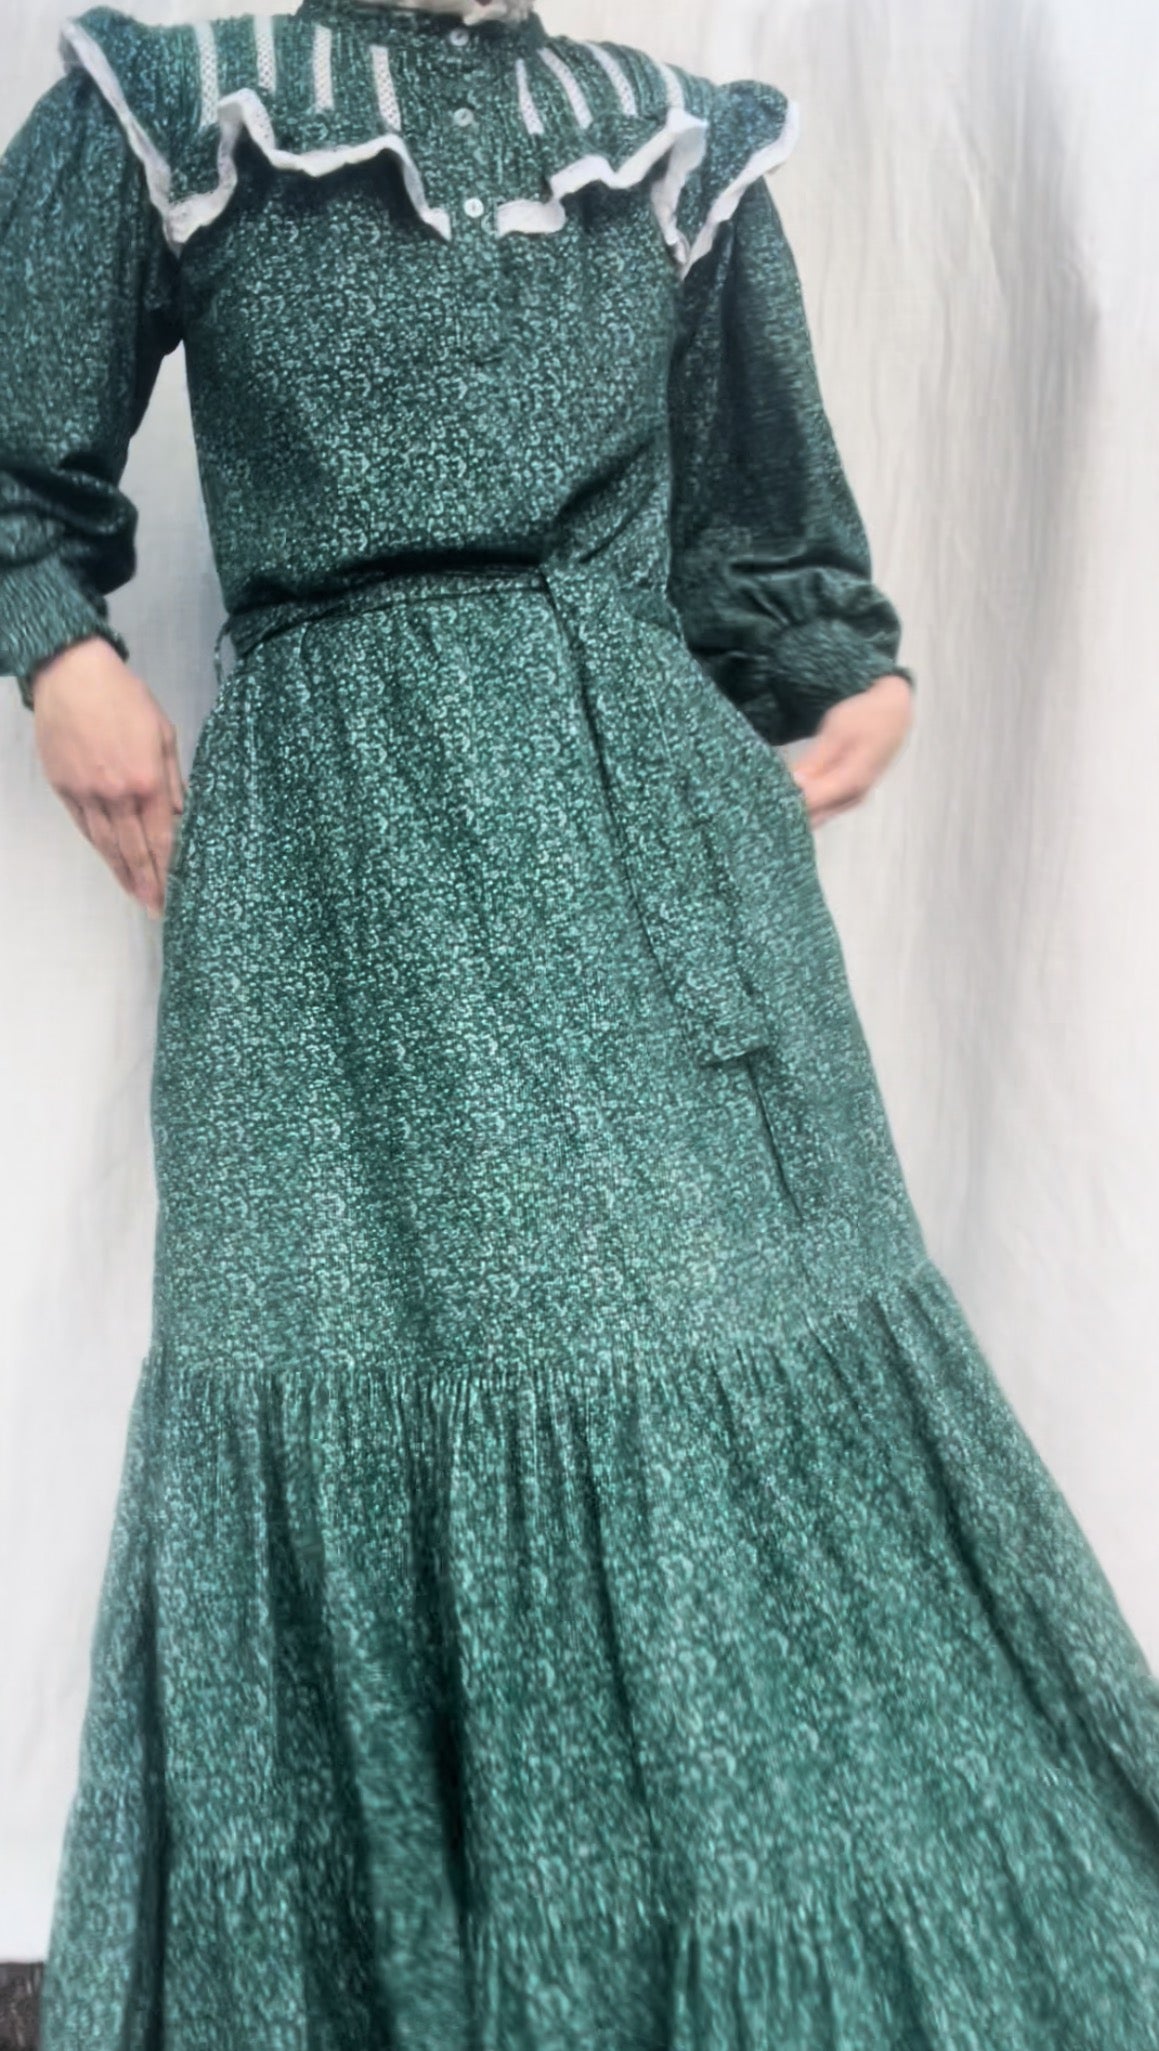 100% RECYCLED COTTON CORDUROY - CLOTHILDE DRESS FOREST GREEN FLORAL